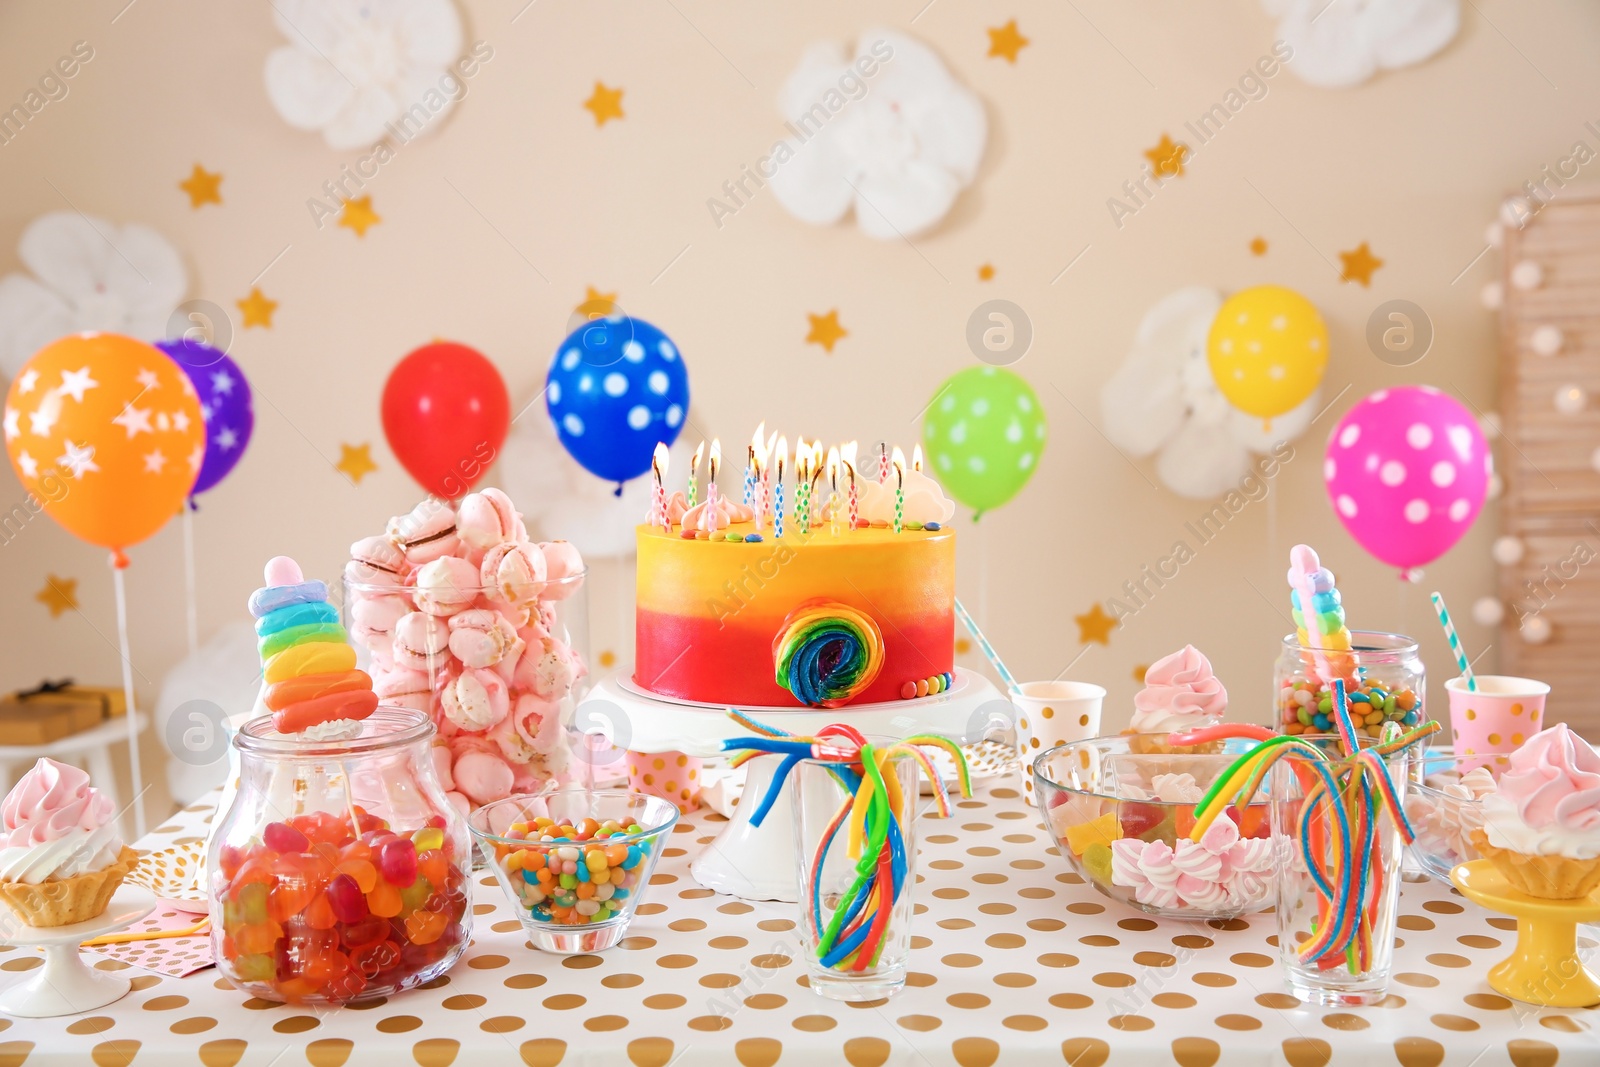 Photo of Table with birthday cake and delicious treats indoors